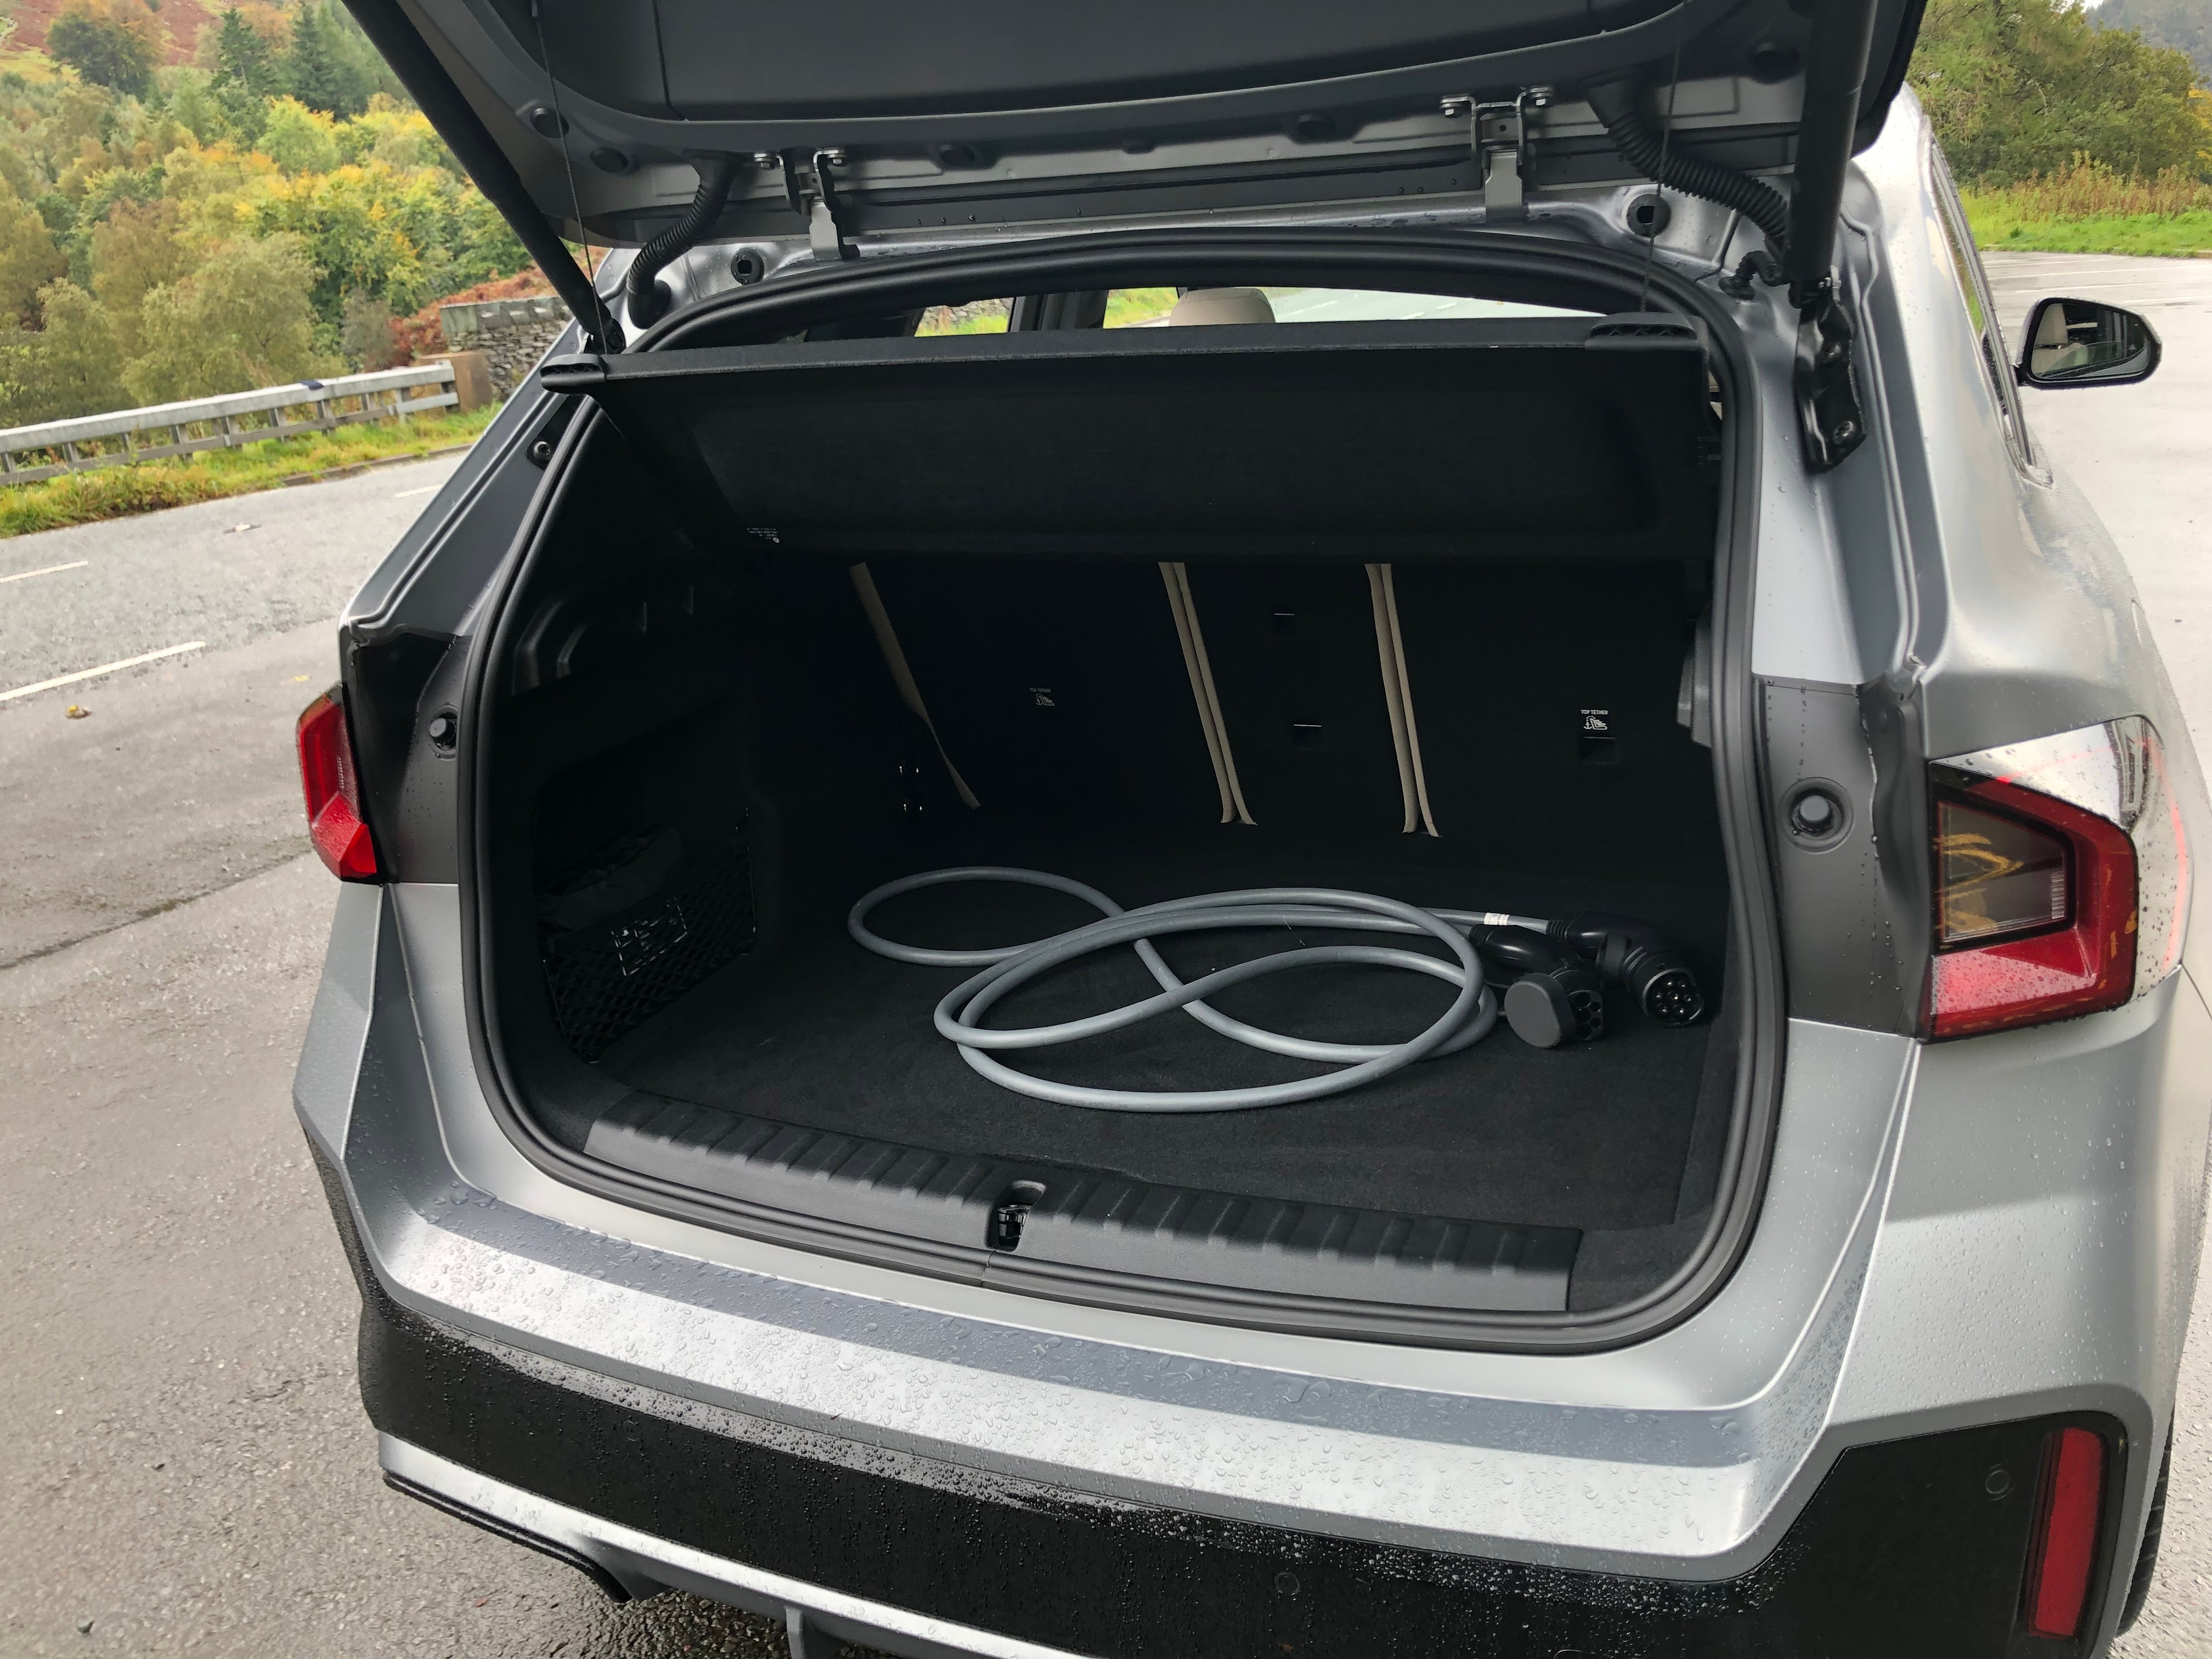 The boot’s not massive, but the iX1 is a good size for a couple or small family